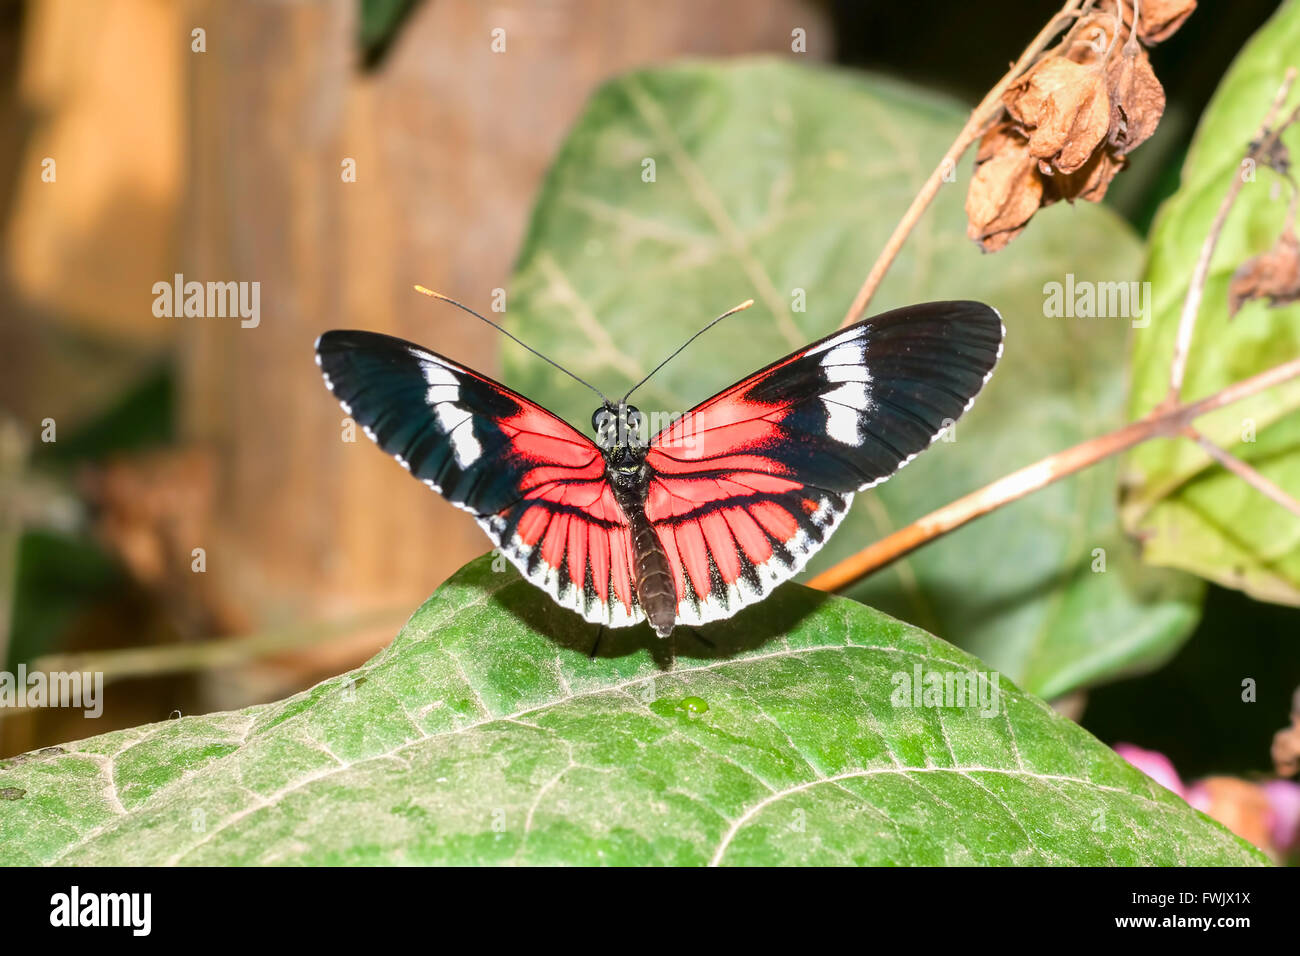 Red Cattle Heart Swallowtail Butterfly, Tropical Rainforest, South America Stock Photo